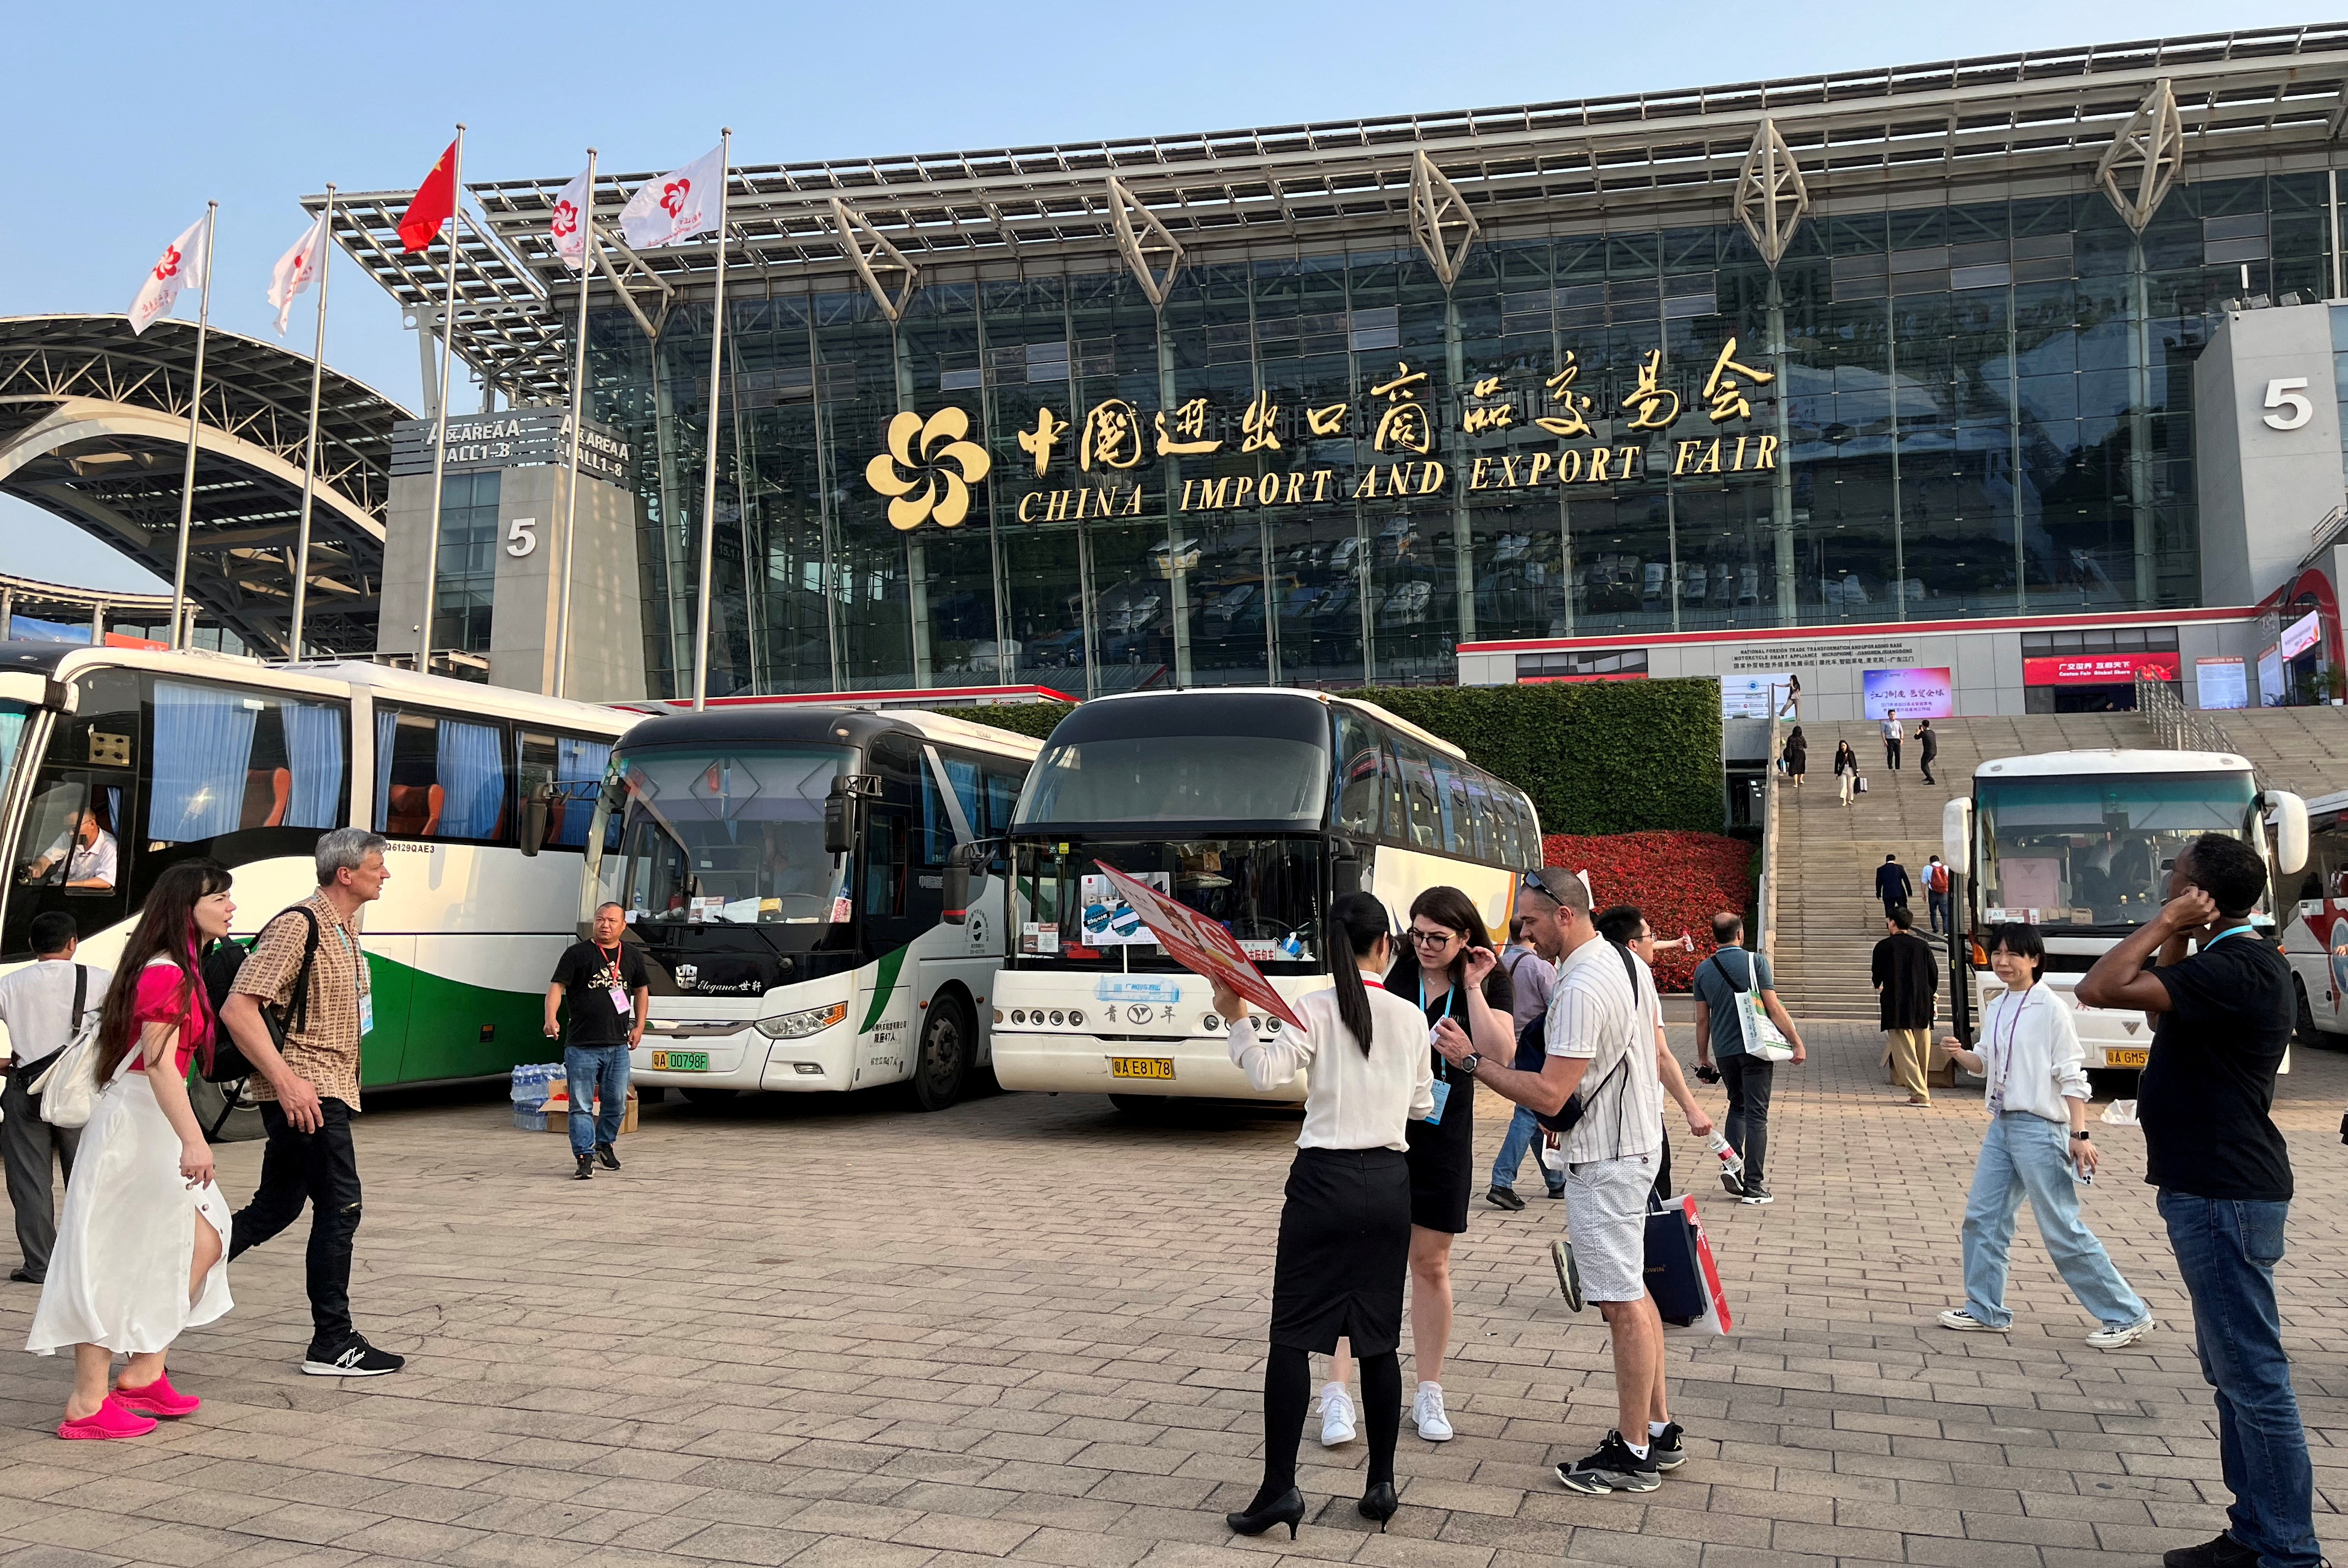 China Import and Export Fair, also known as Canton Fair, in Guangzhou